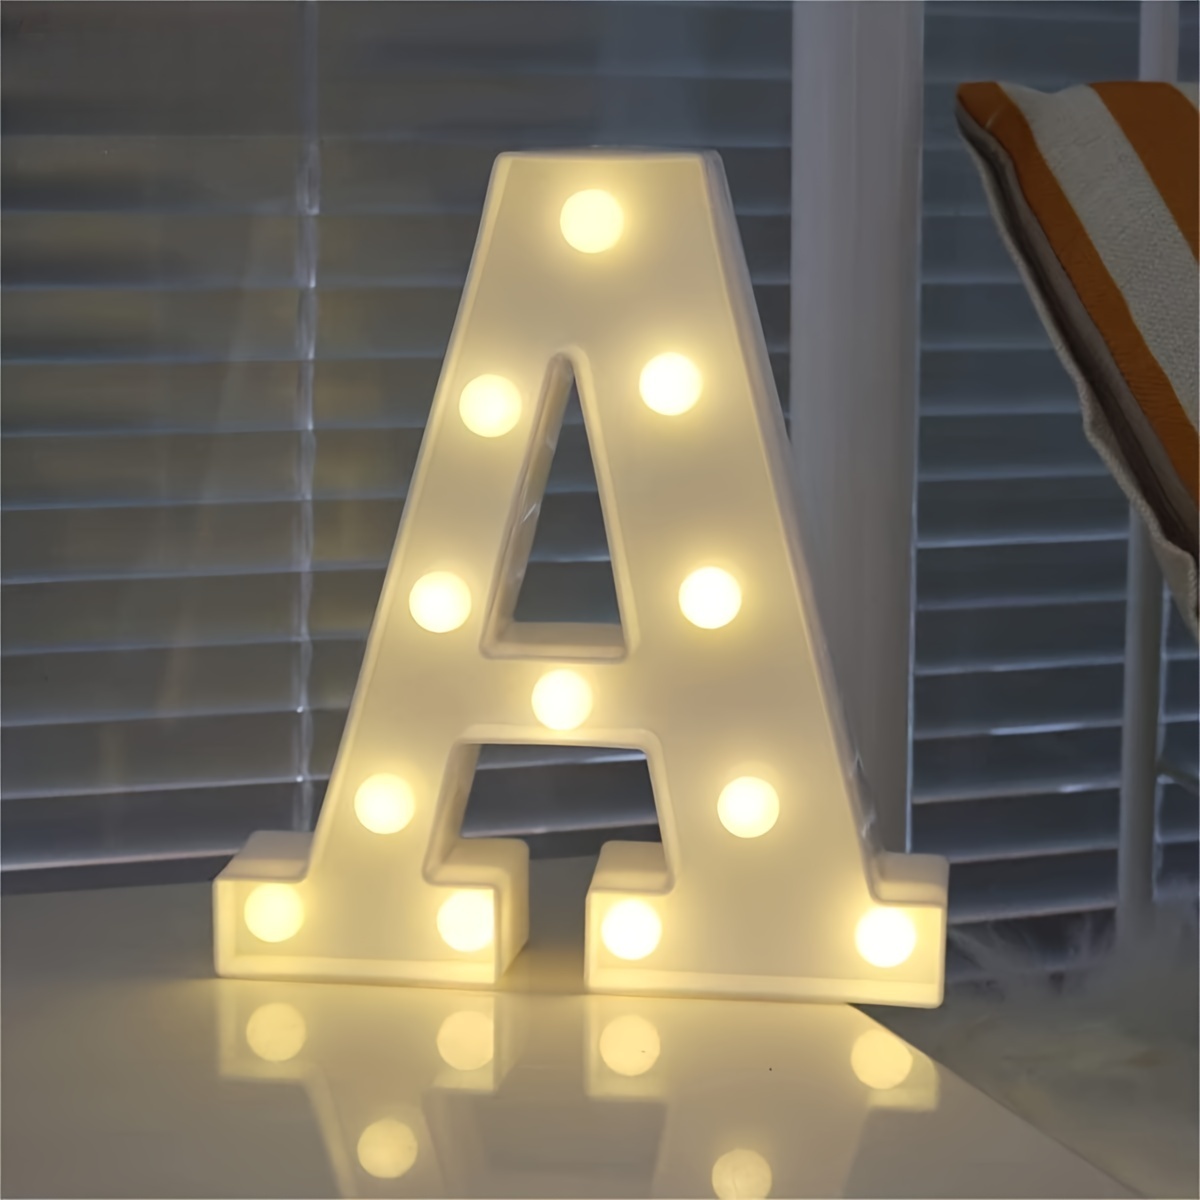 Larger Led Light Up Numbers 1 Letters, AUSAYE Decorative Number Lights Sign  for Night Light Wedding Party Decor Birthday Christmas Home Bar Decoration